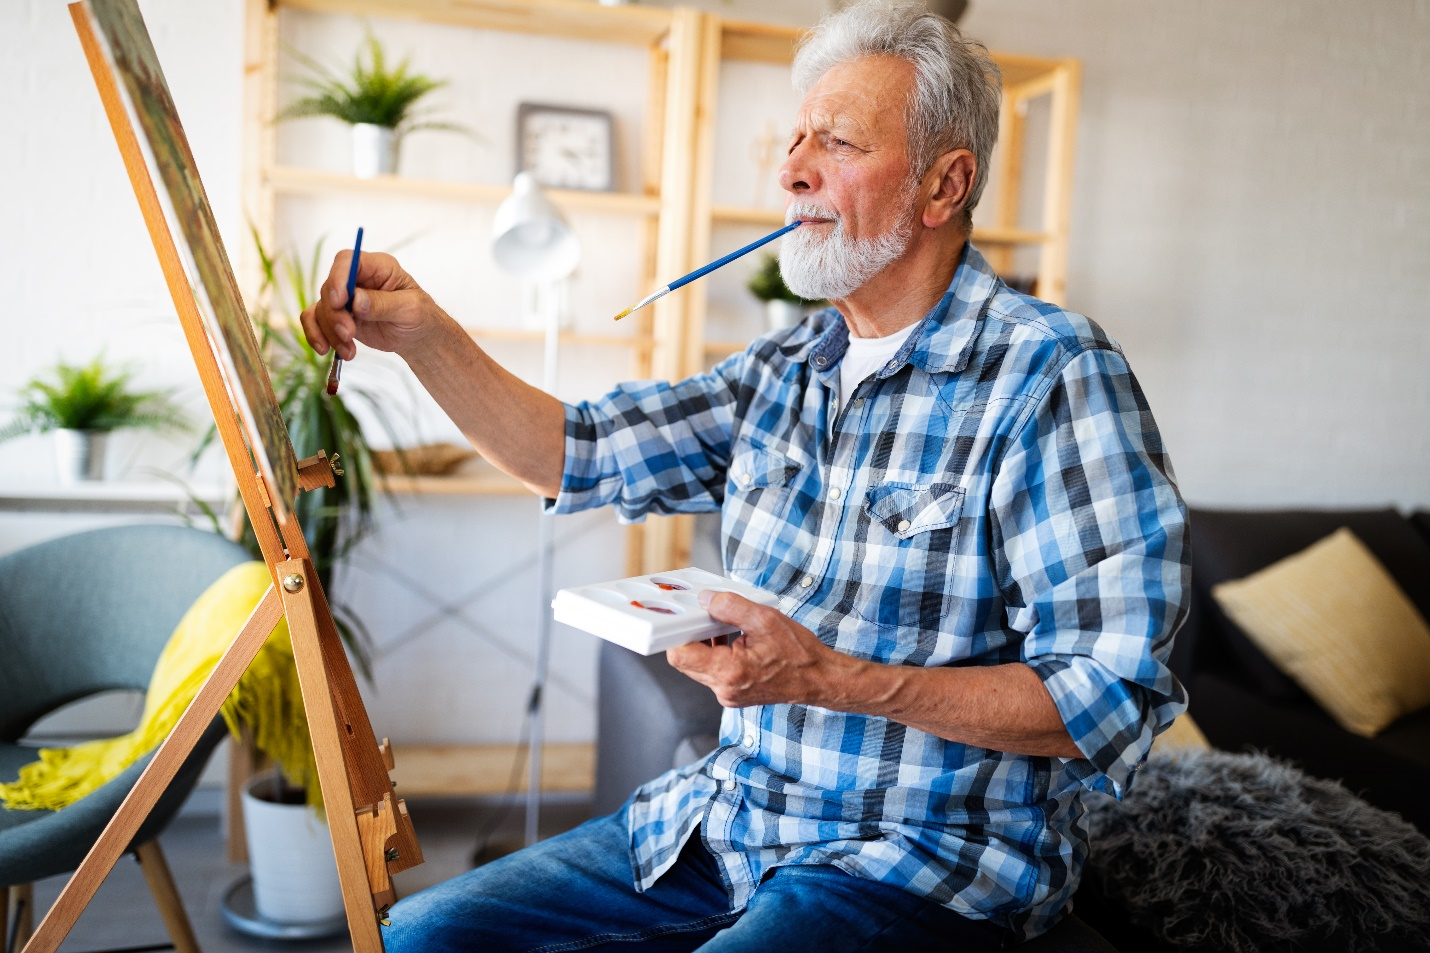 A healthy old man painting on a canvas